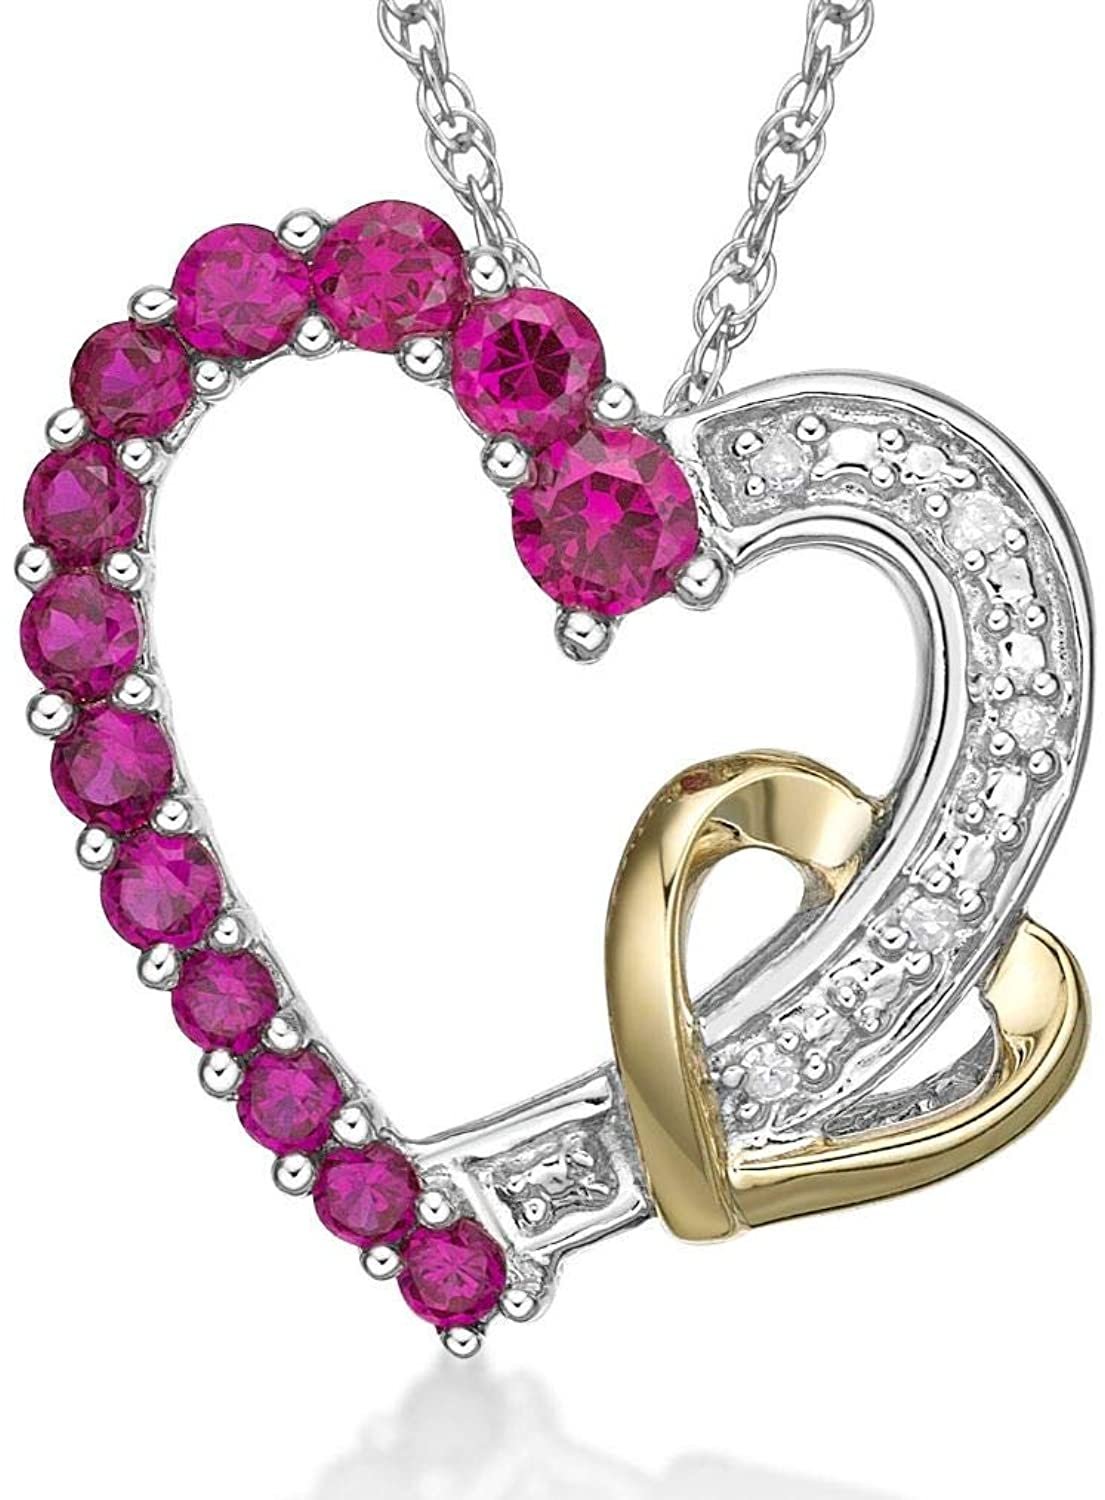 10K Yellow Gold and .925 Sterling Silver Lab Grown Ruby & Diamond Hearts Pendant Necklace on 18" Rope Chain (H-I Color, I1-I2 Clarity)